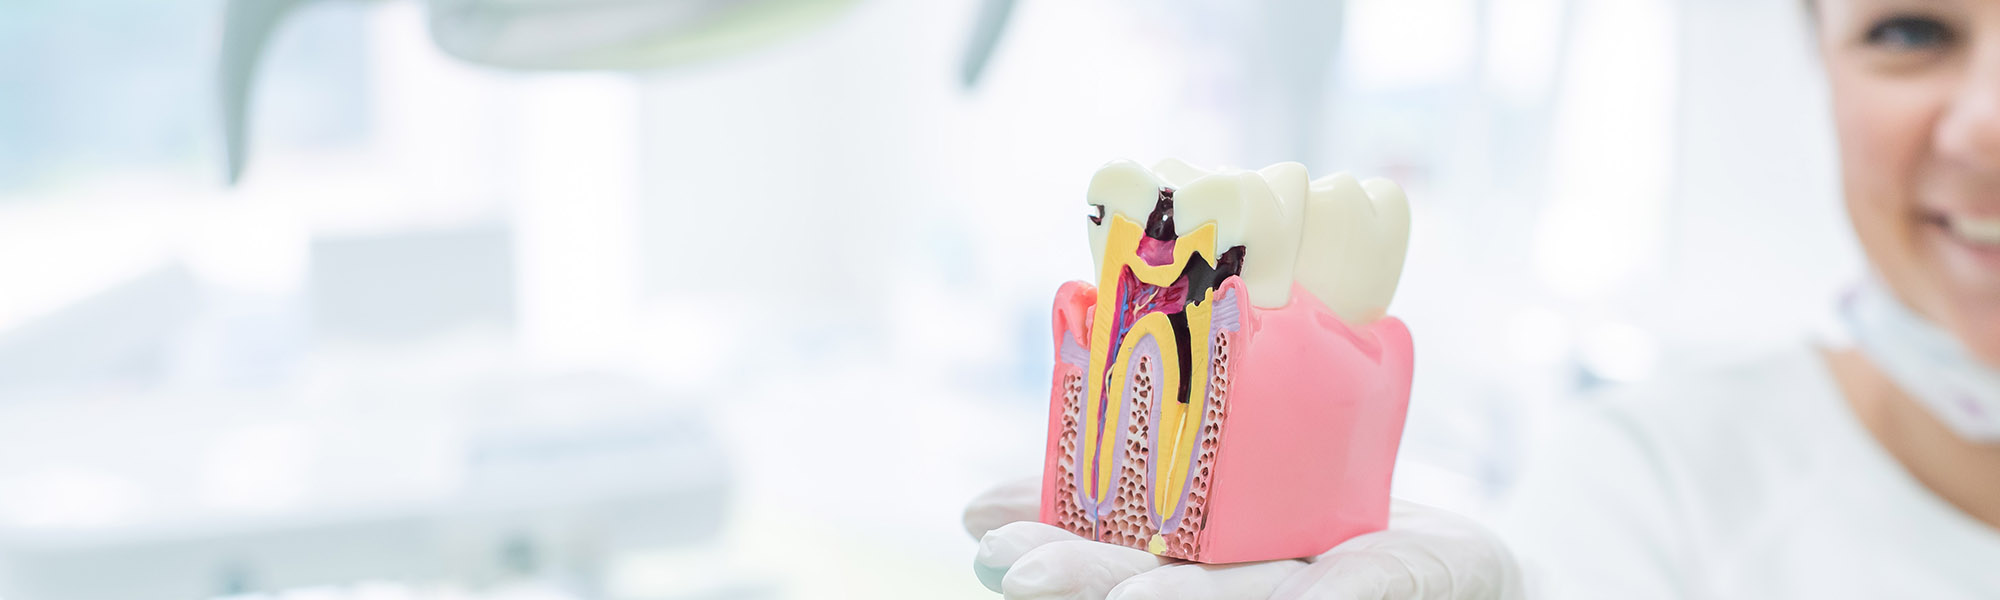 8 Signs That You Have a Tooth Cavity banner image.